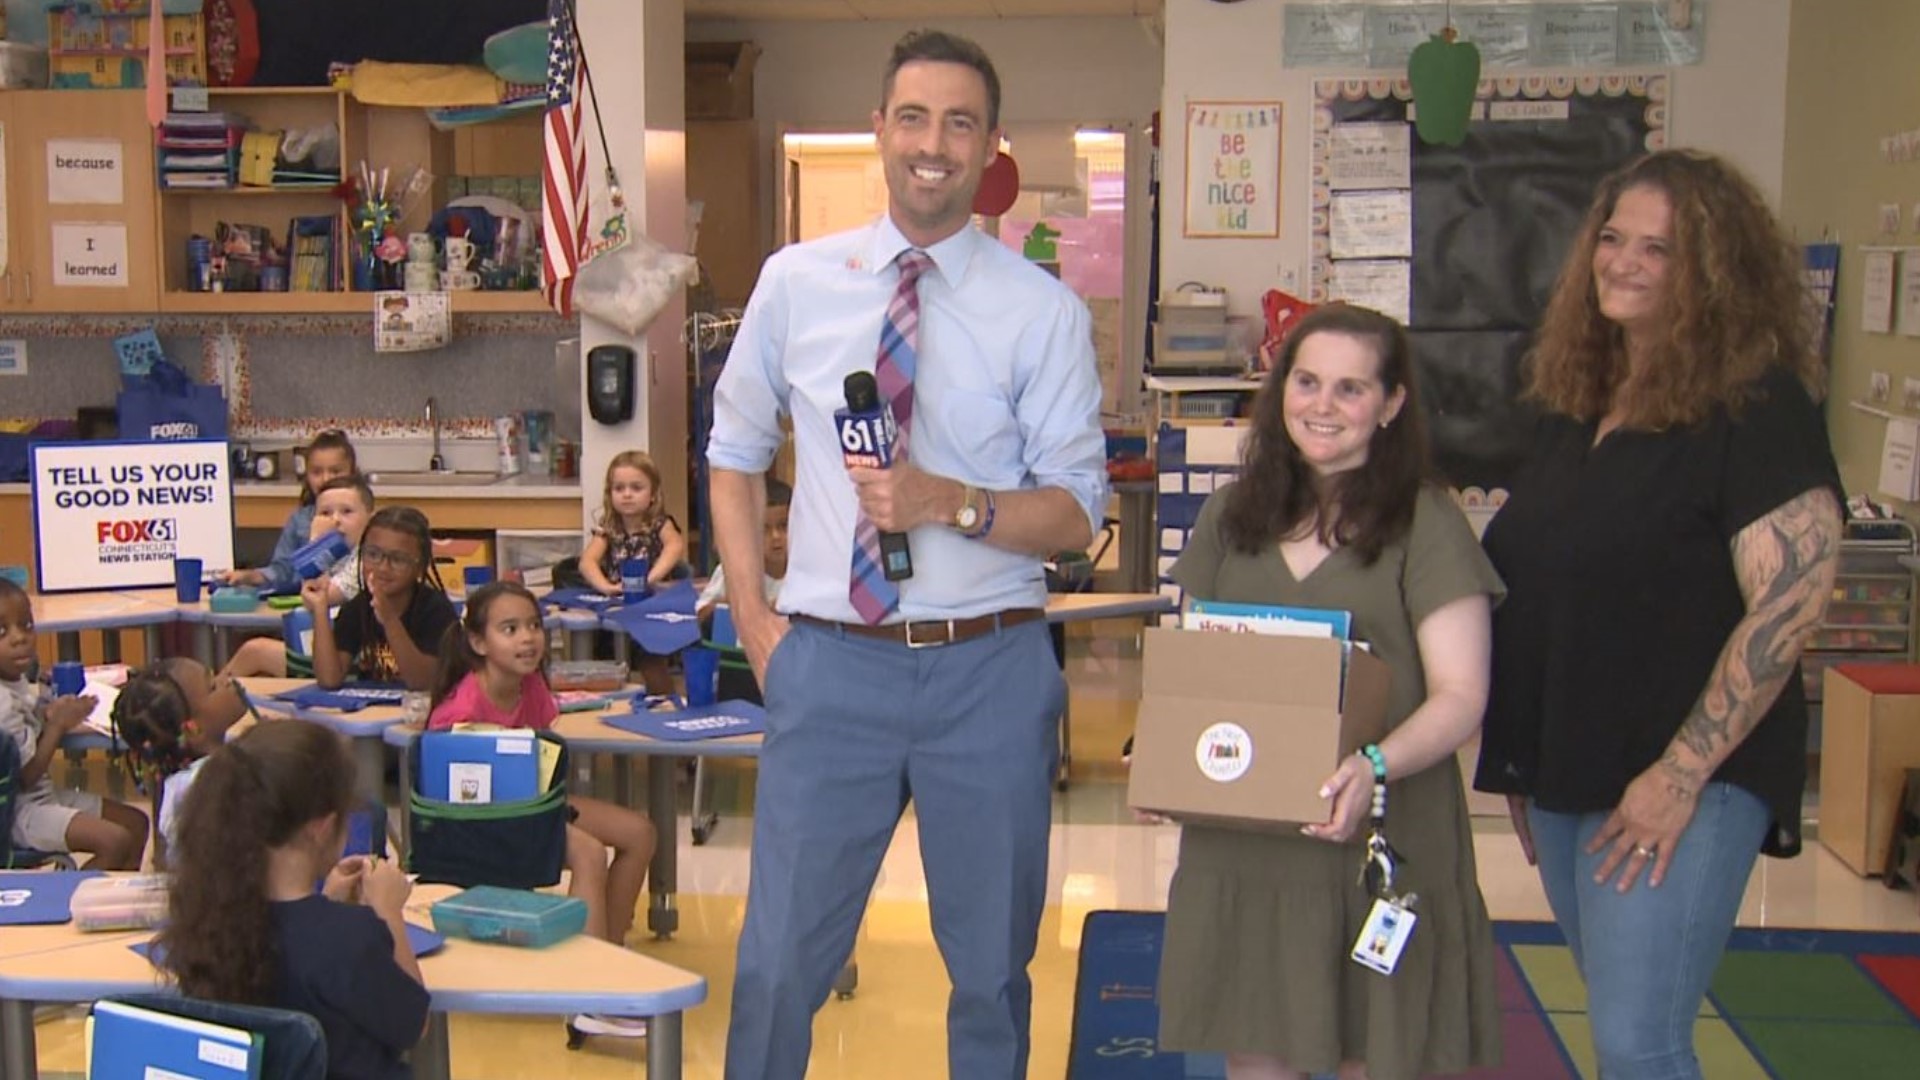 A teacher at this Bristol elementary school as been recognized as an outstanding educator.